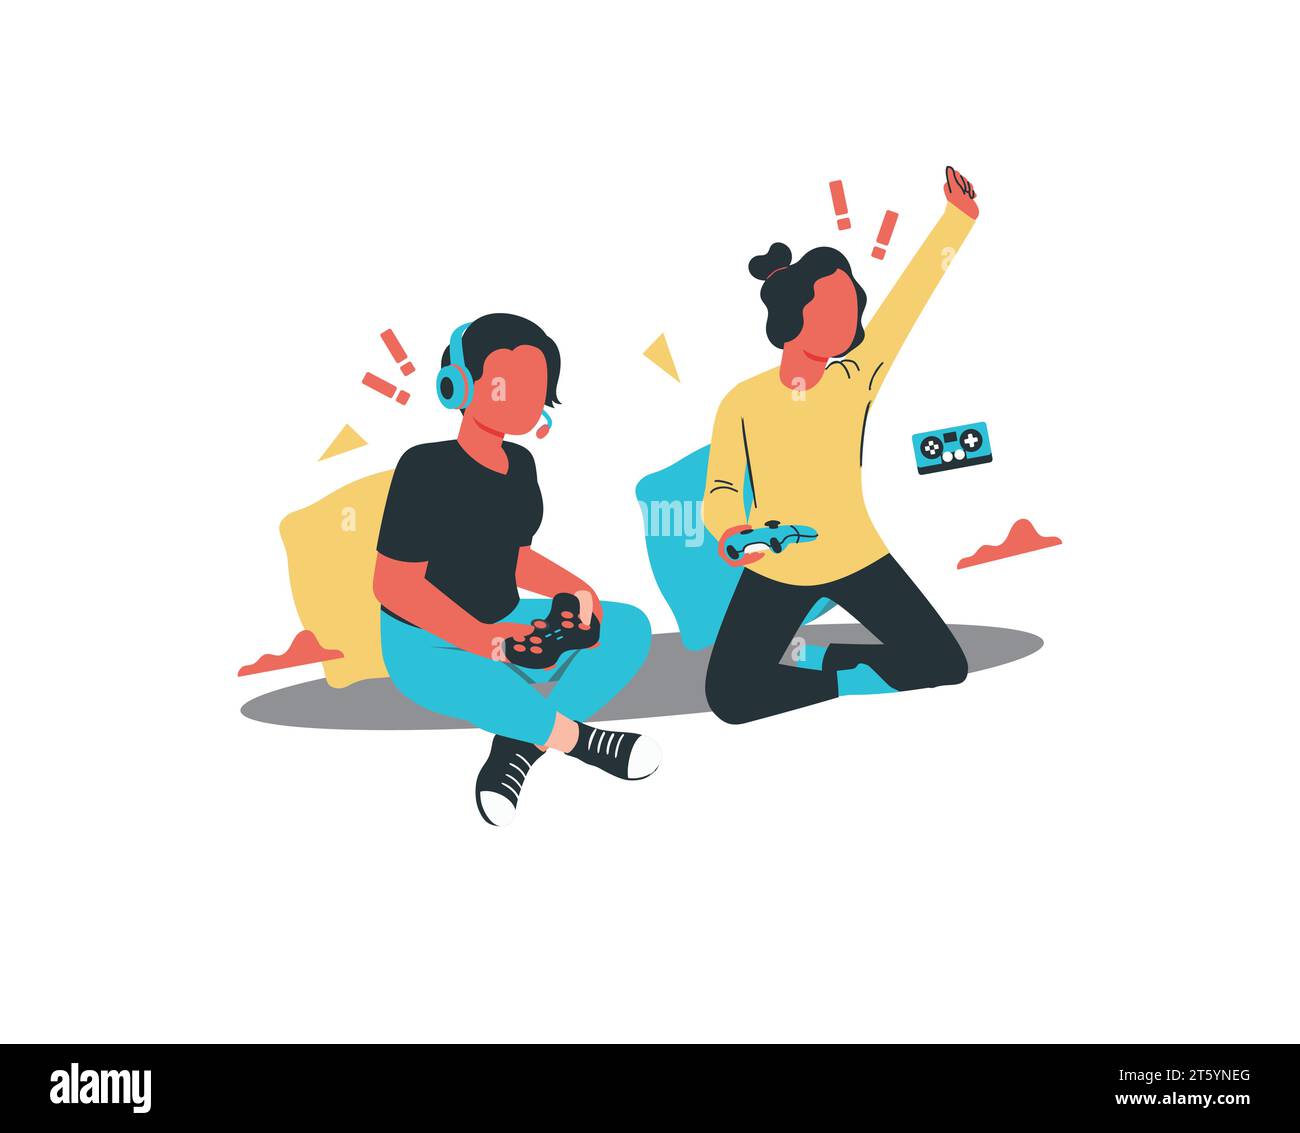 Young man and woman playing video games together. Flat vector illustration. Stock Vector